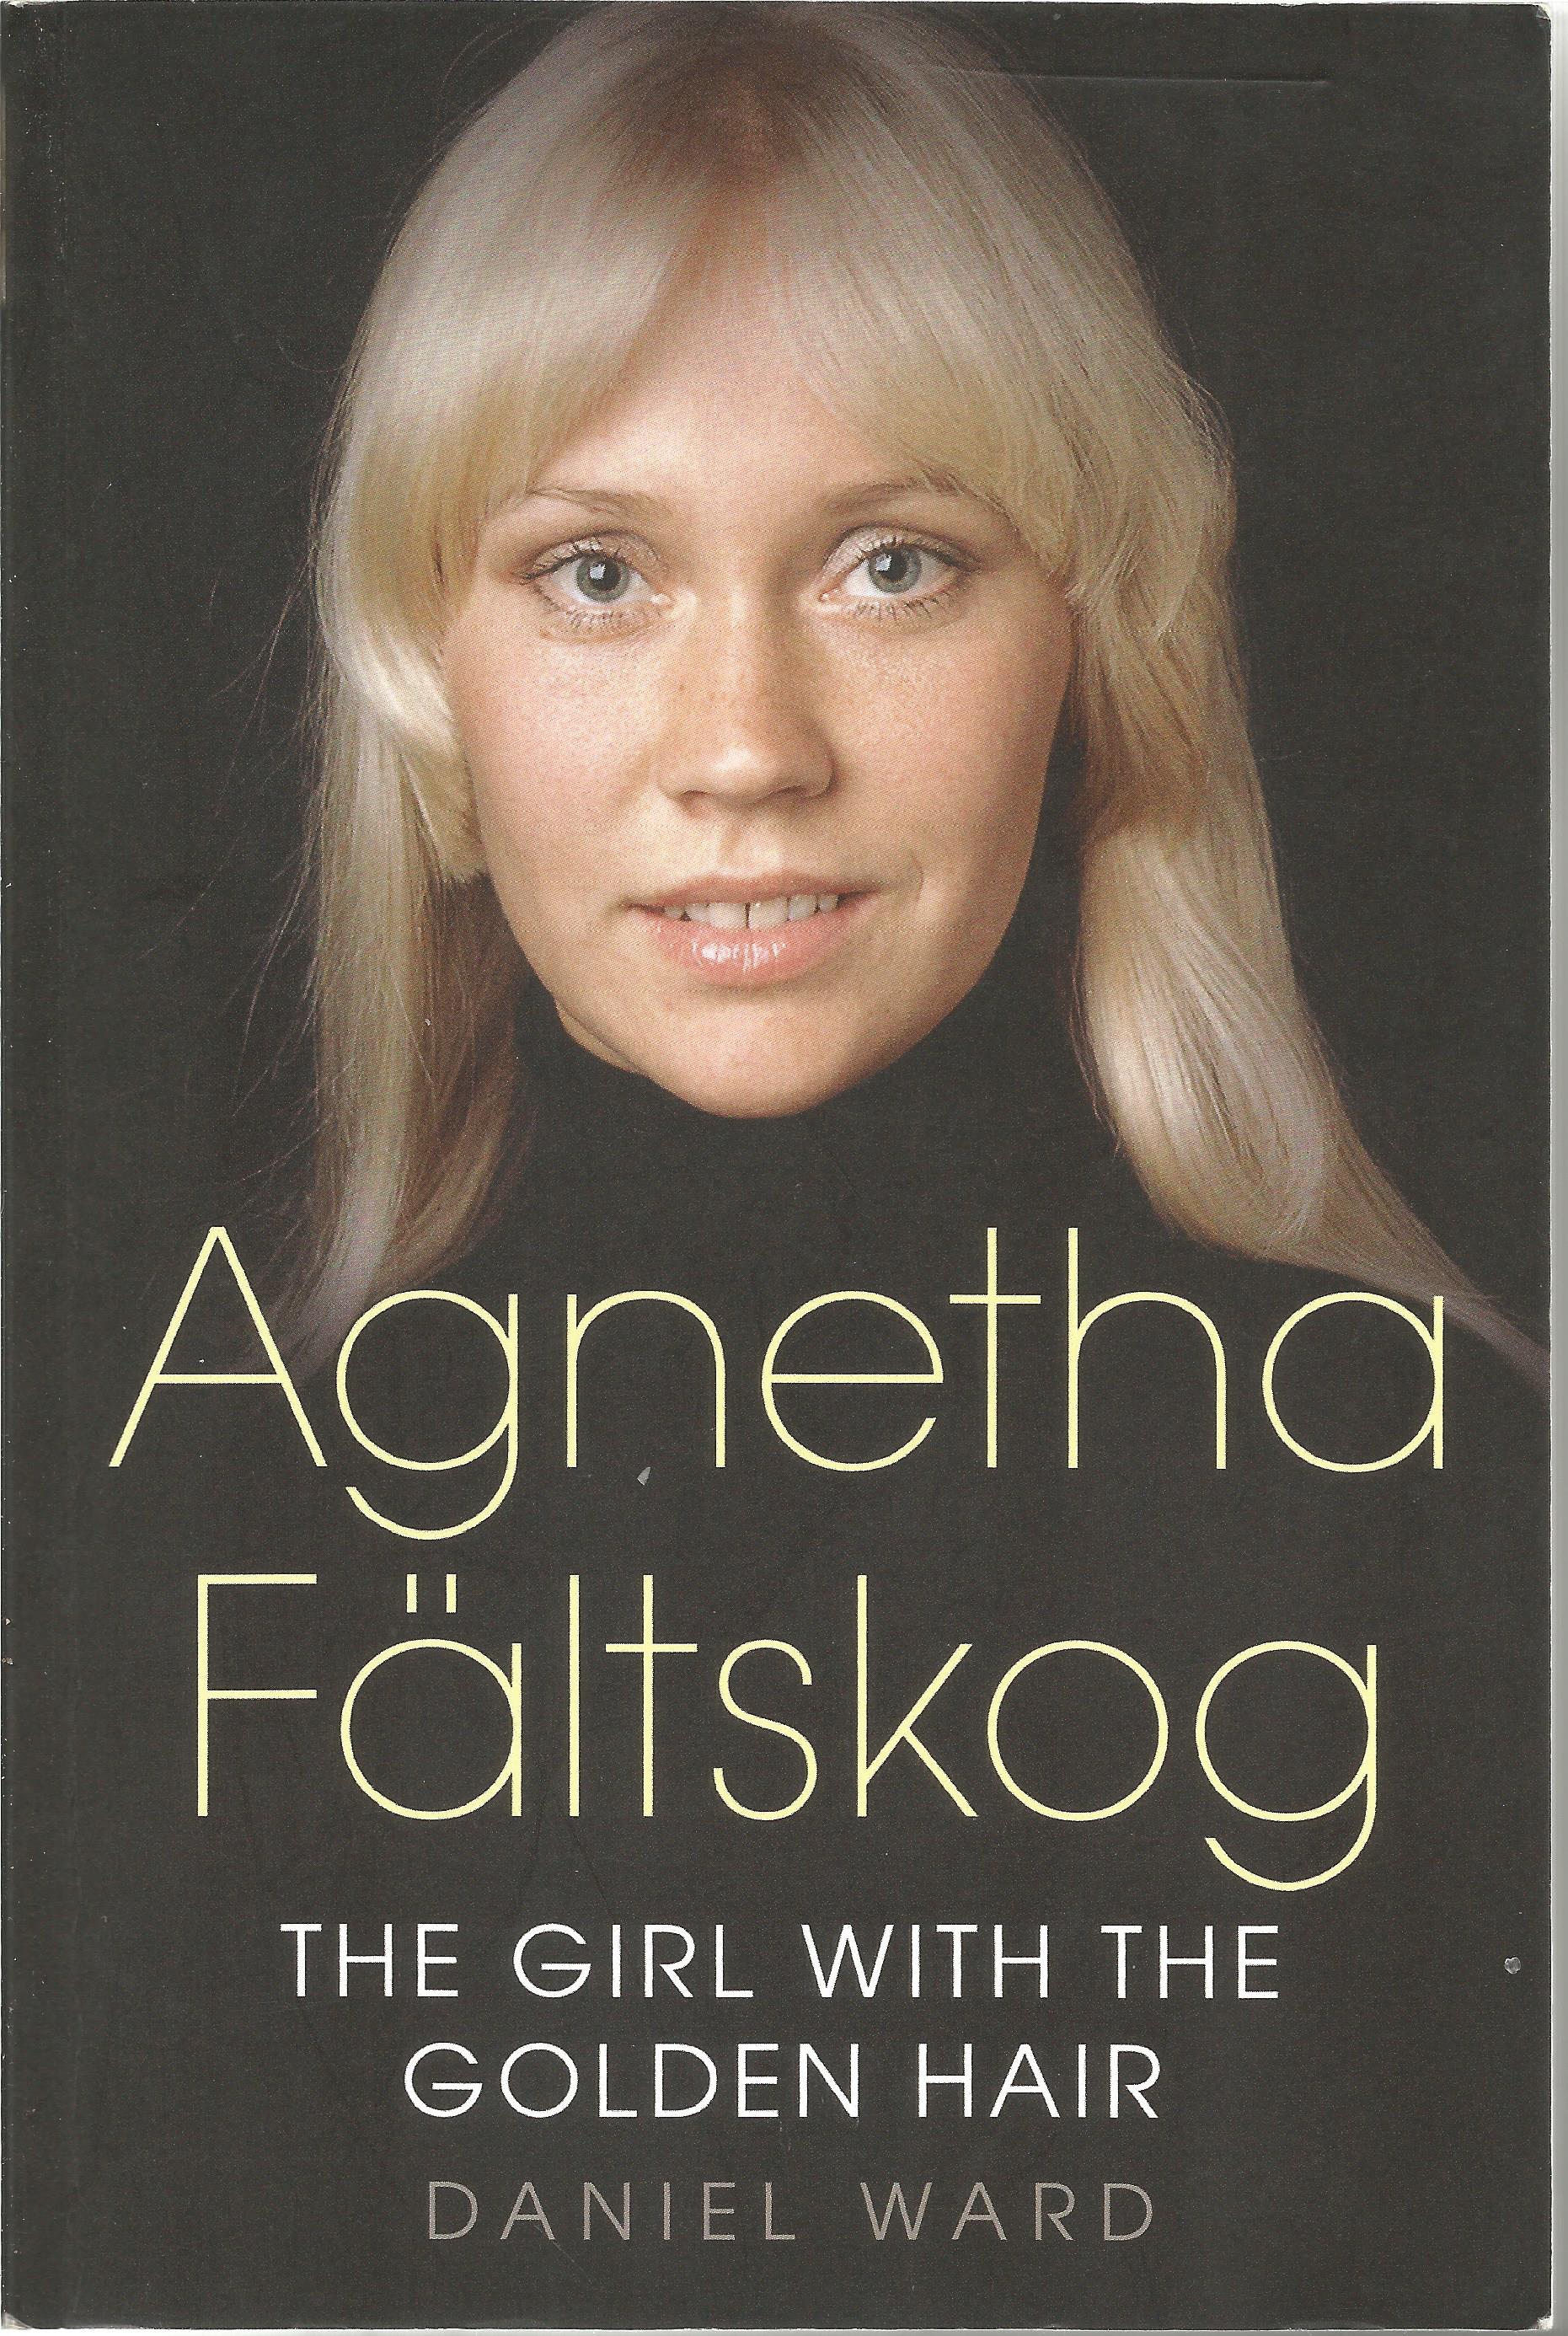 Agnetha Faltskog softback book titled The Girl with the Golden Hair signed on the inside title - Image 2 of 3